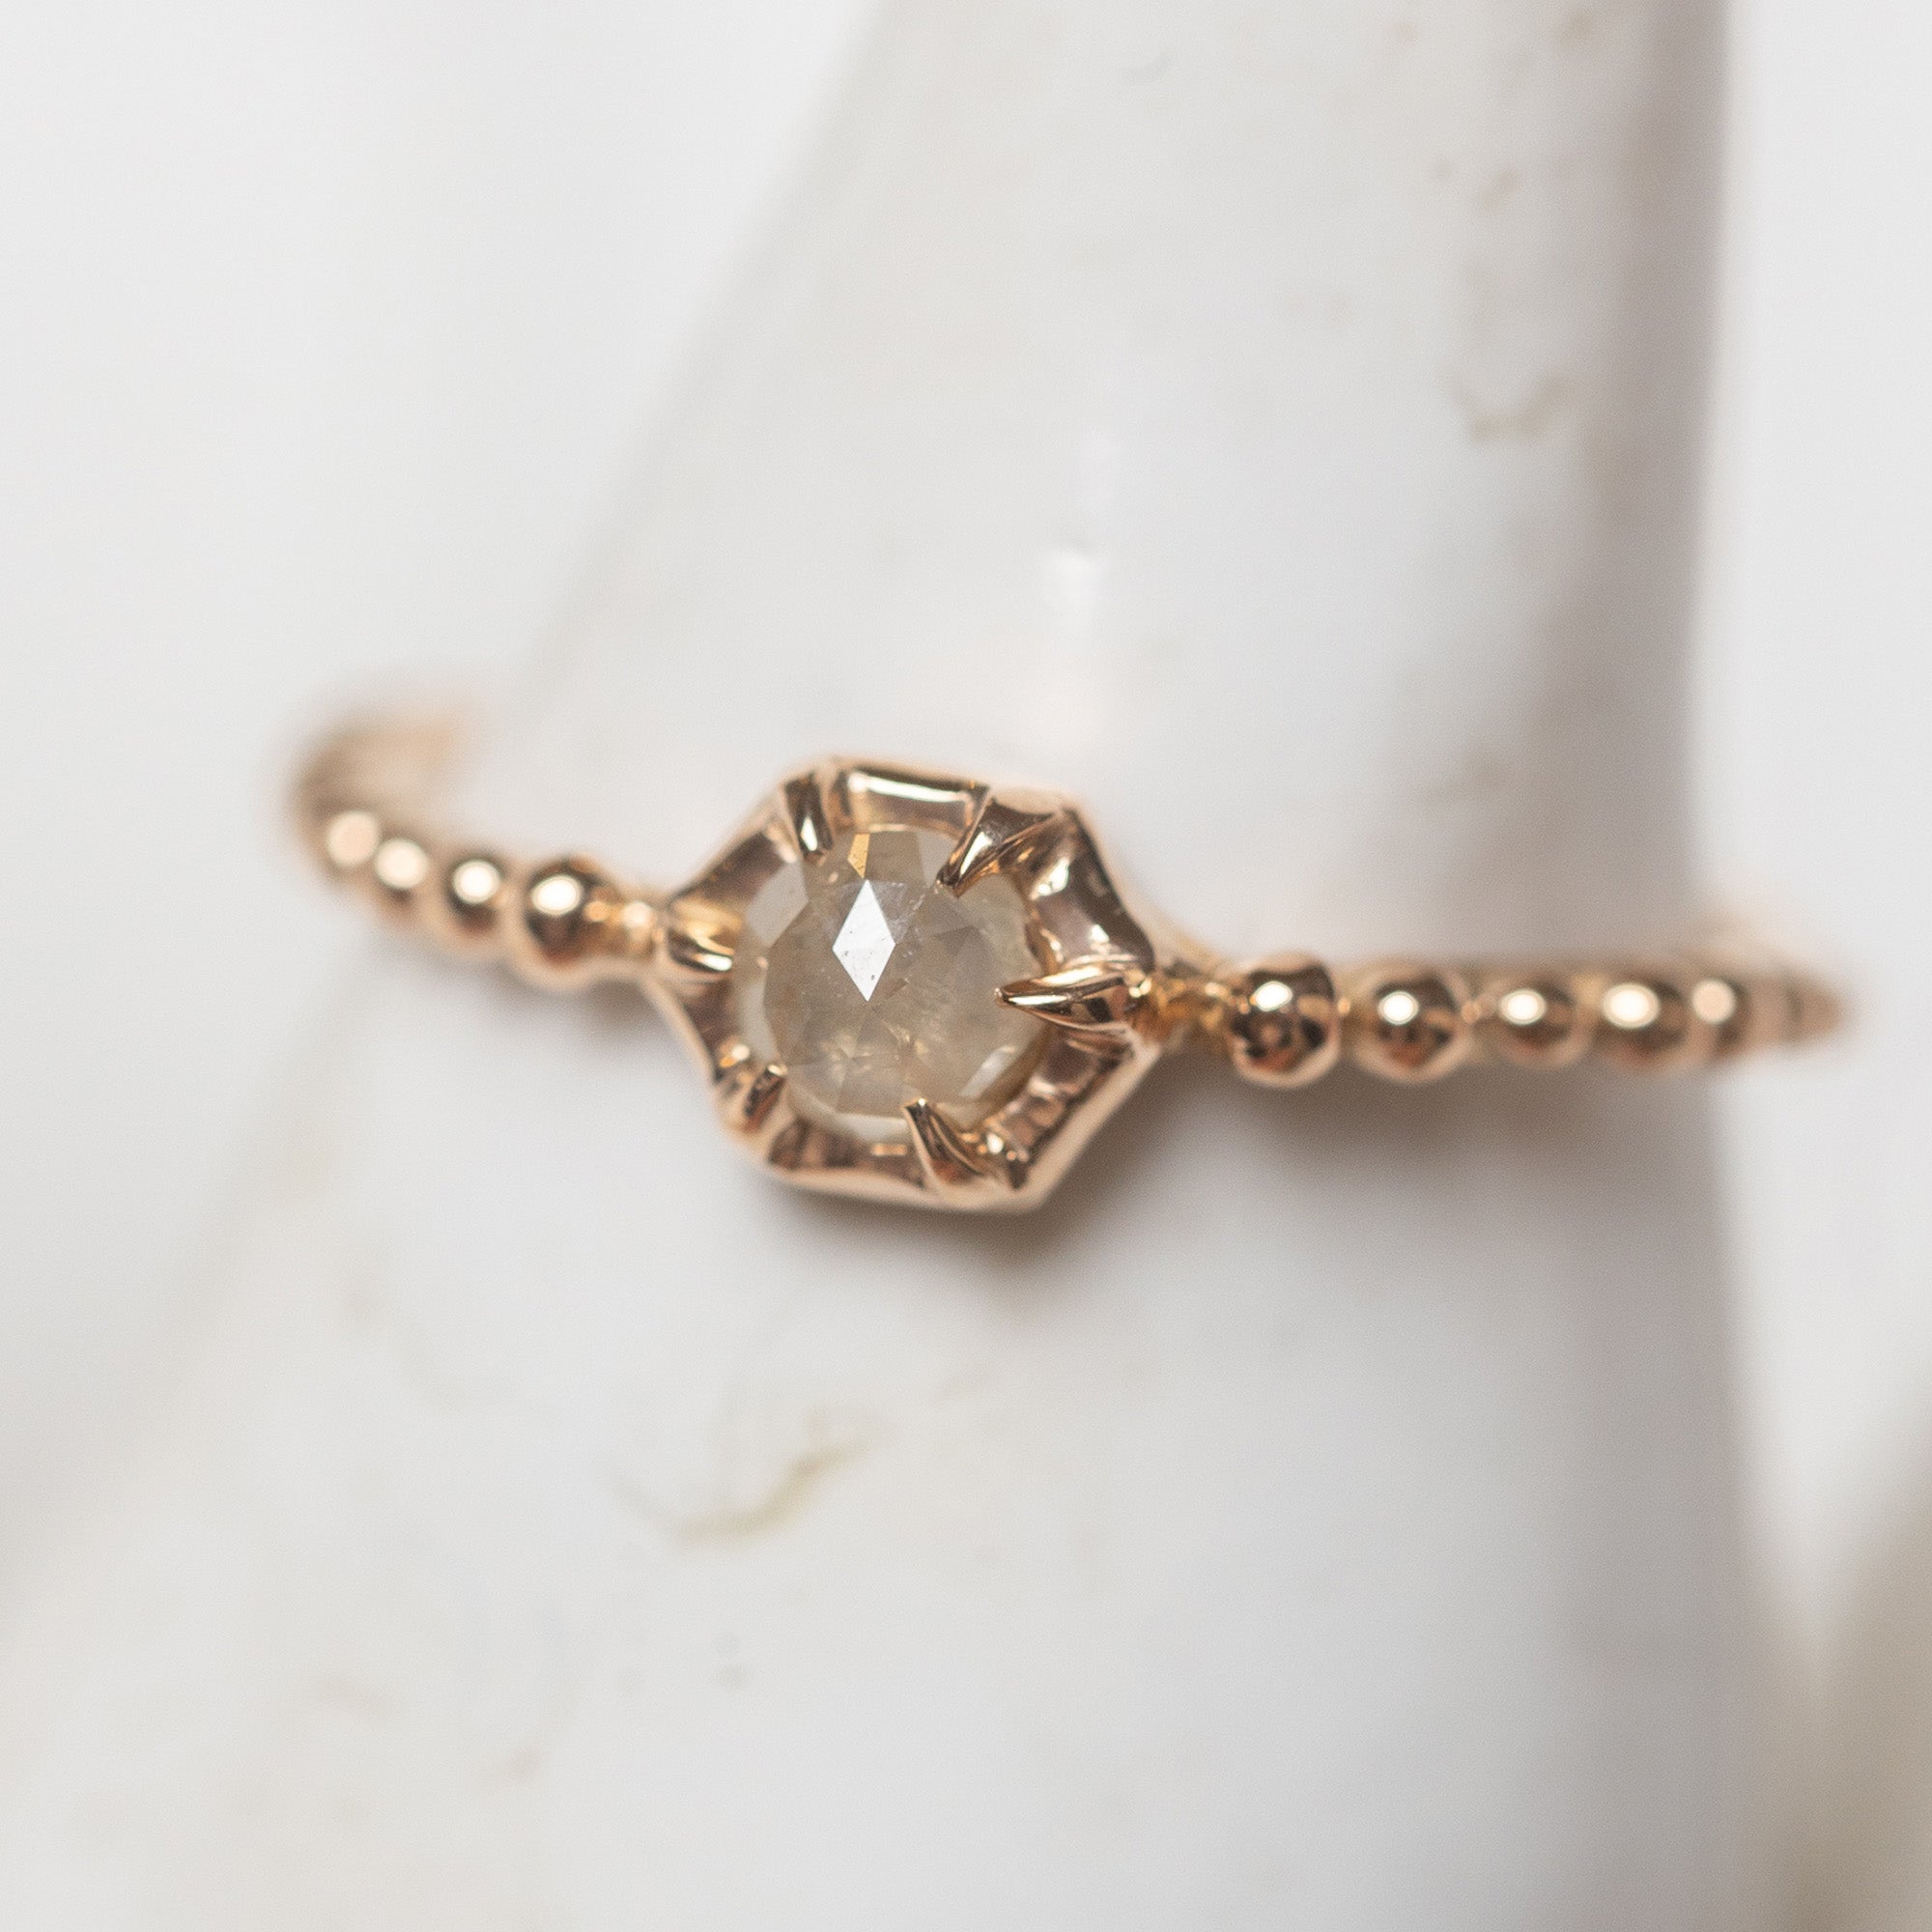 Hexagonal Rose Gold Ring with a White Rustic Diamond (18k)